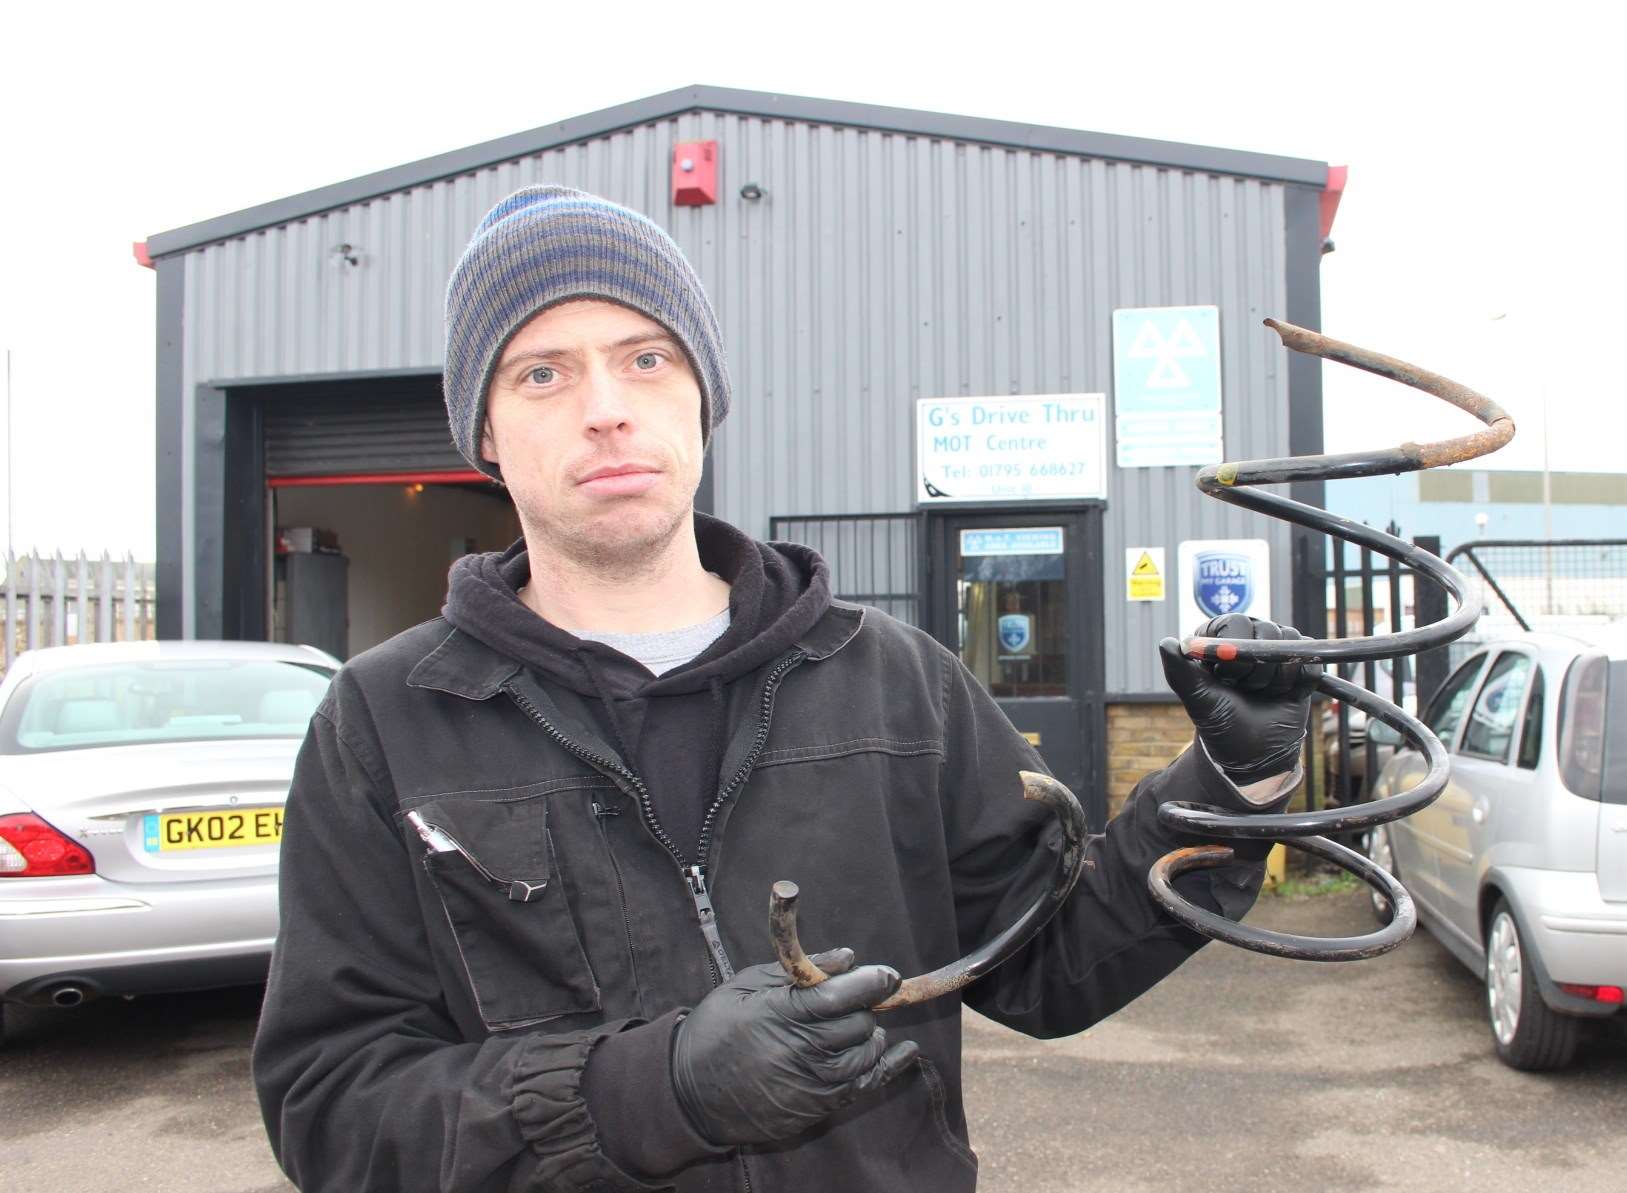 Stuart Bradburn of G's Drive-Thru MOT Centre in Blue Town, Sheerness, says he is replacing at least three car springs a week.